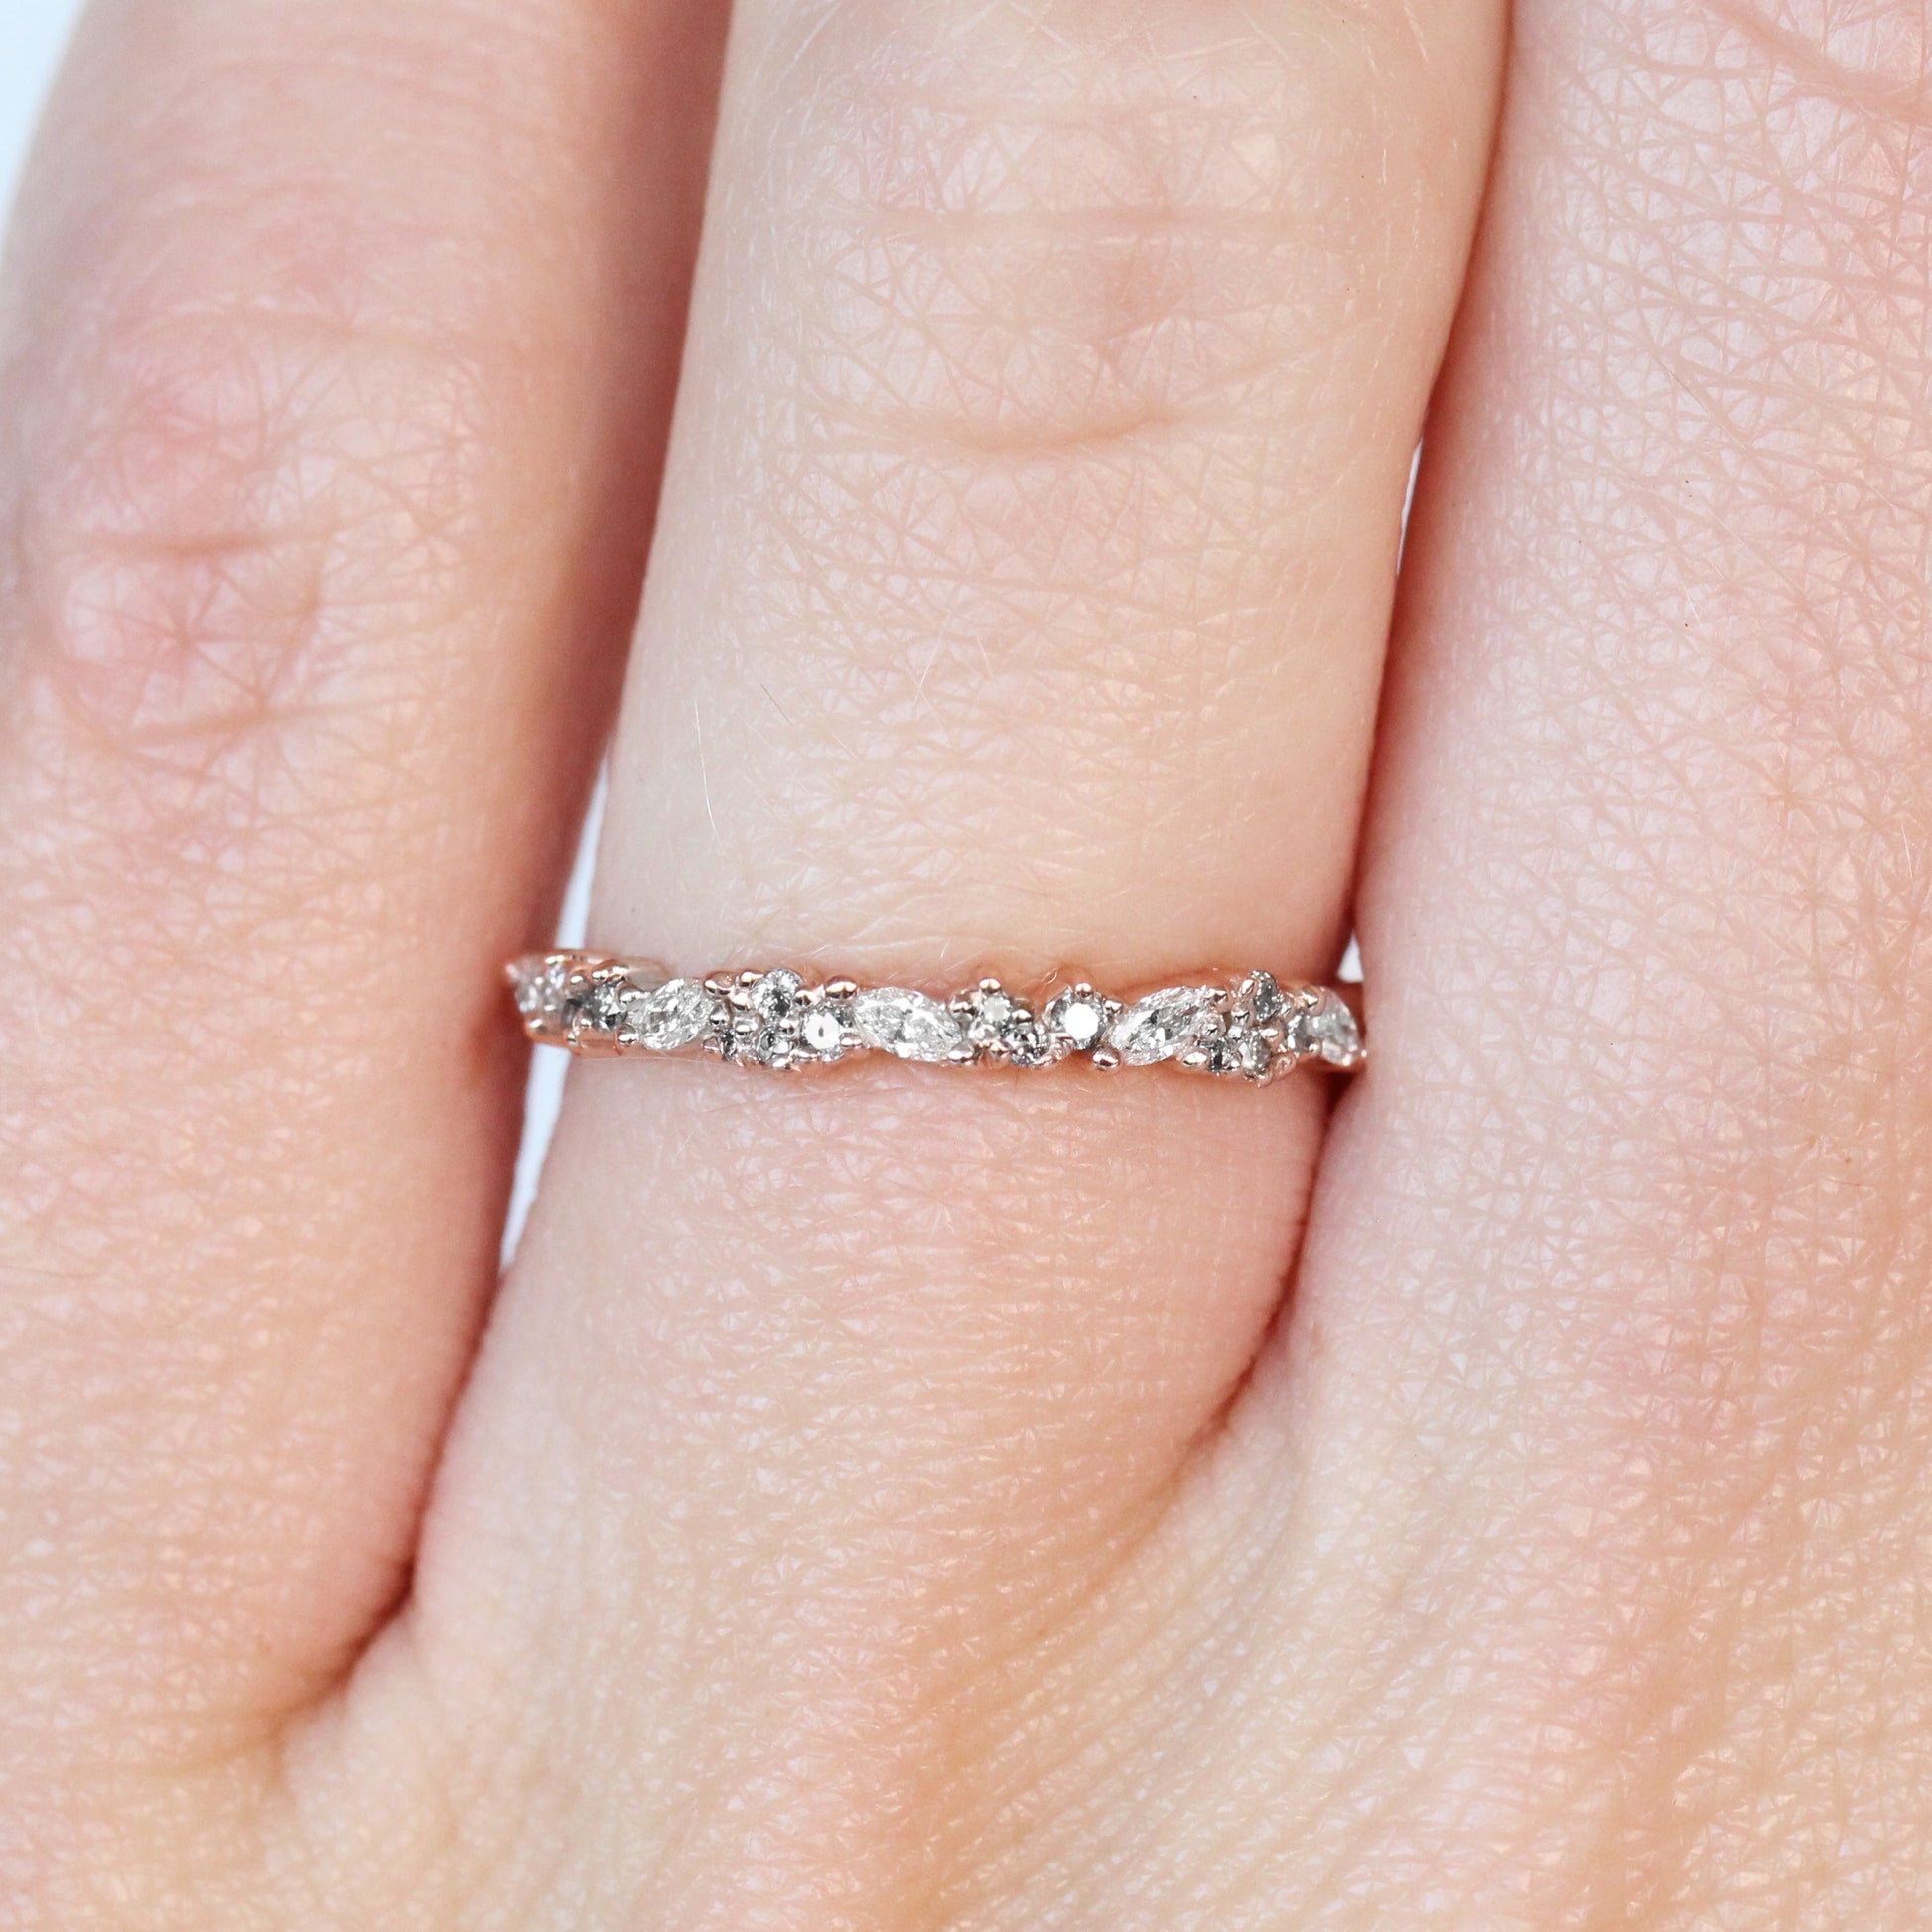 Gennie Diamond Engagement Ring Band - White + Gray Diamonds - Midwinter Co. Alternative Bridal Rings and Modern Fine Jewelry